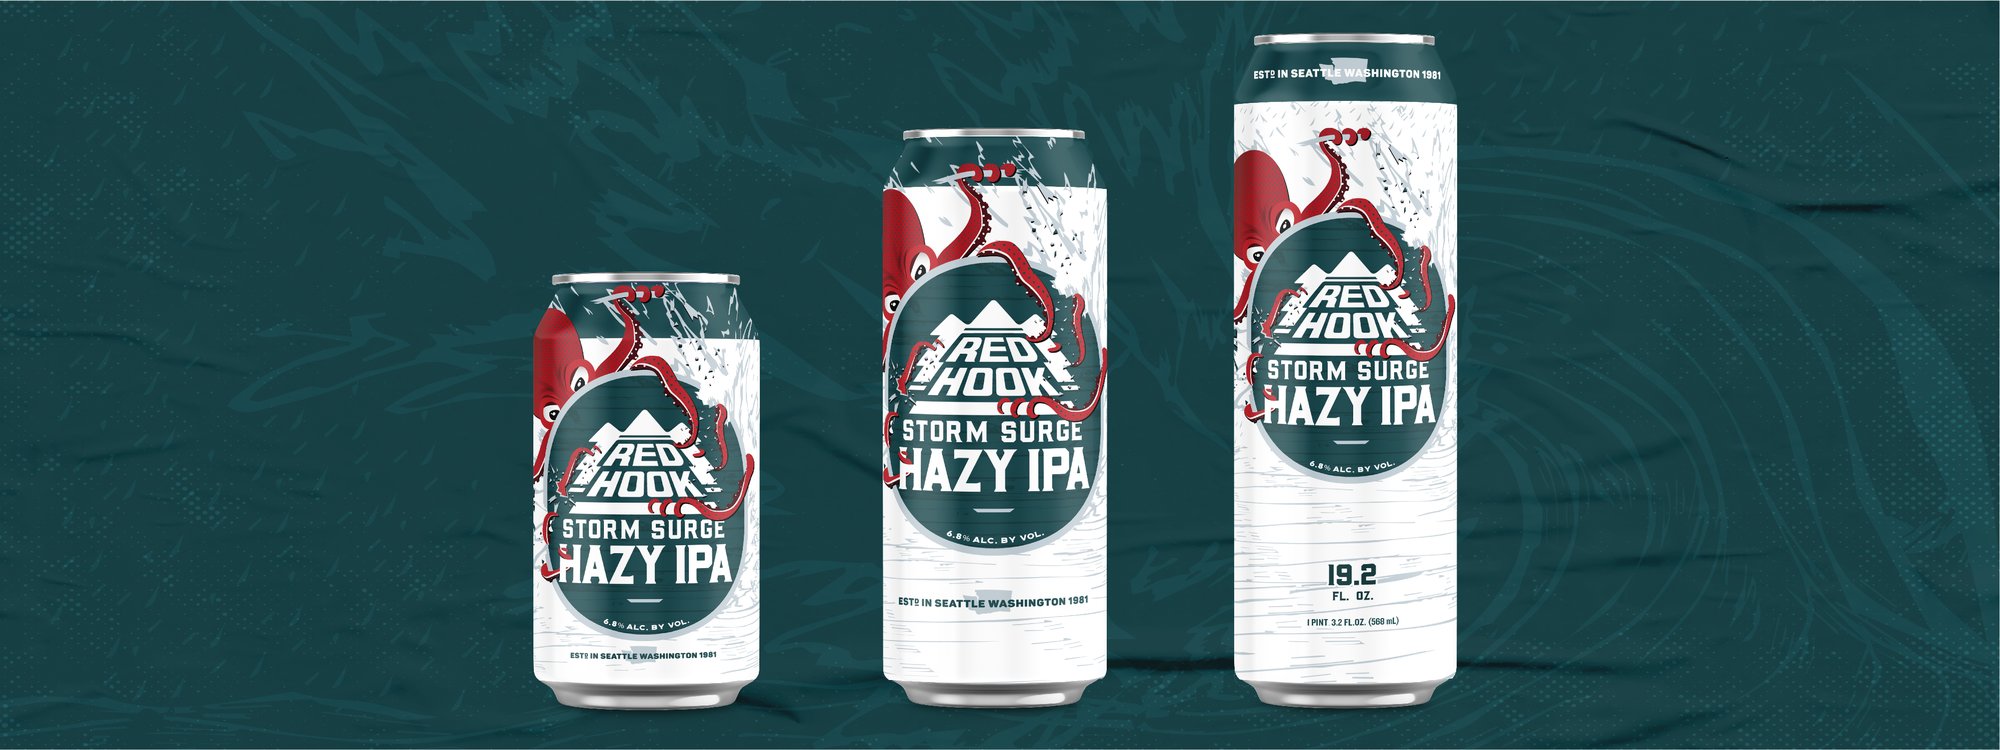 Redhook Storm Surge Hazy IPA three can sizes with teal, red, and white labels. 